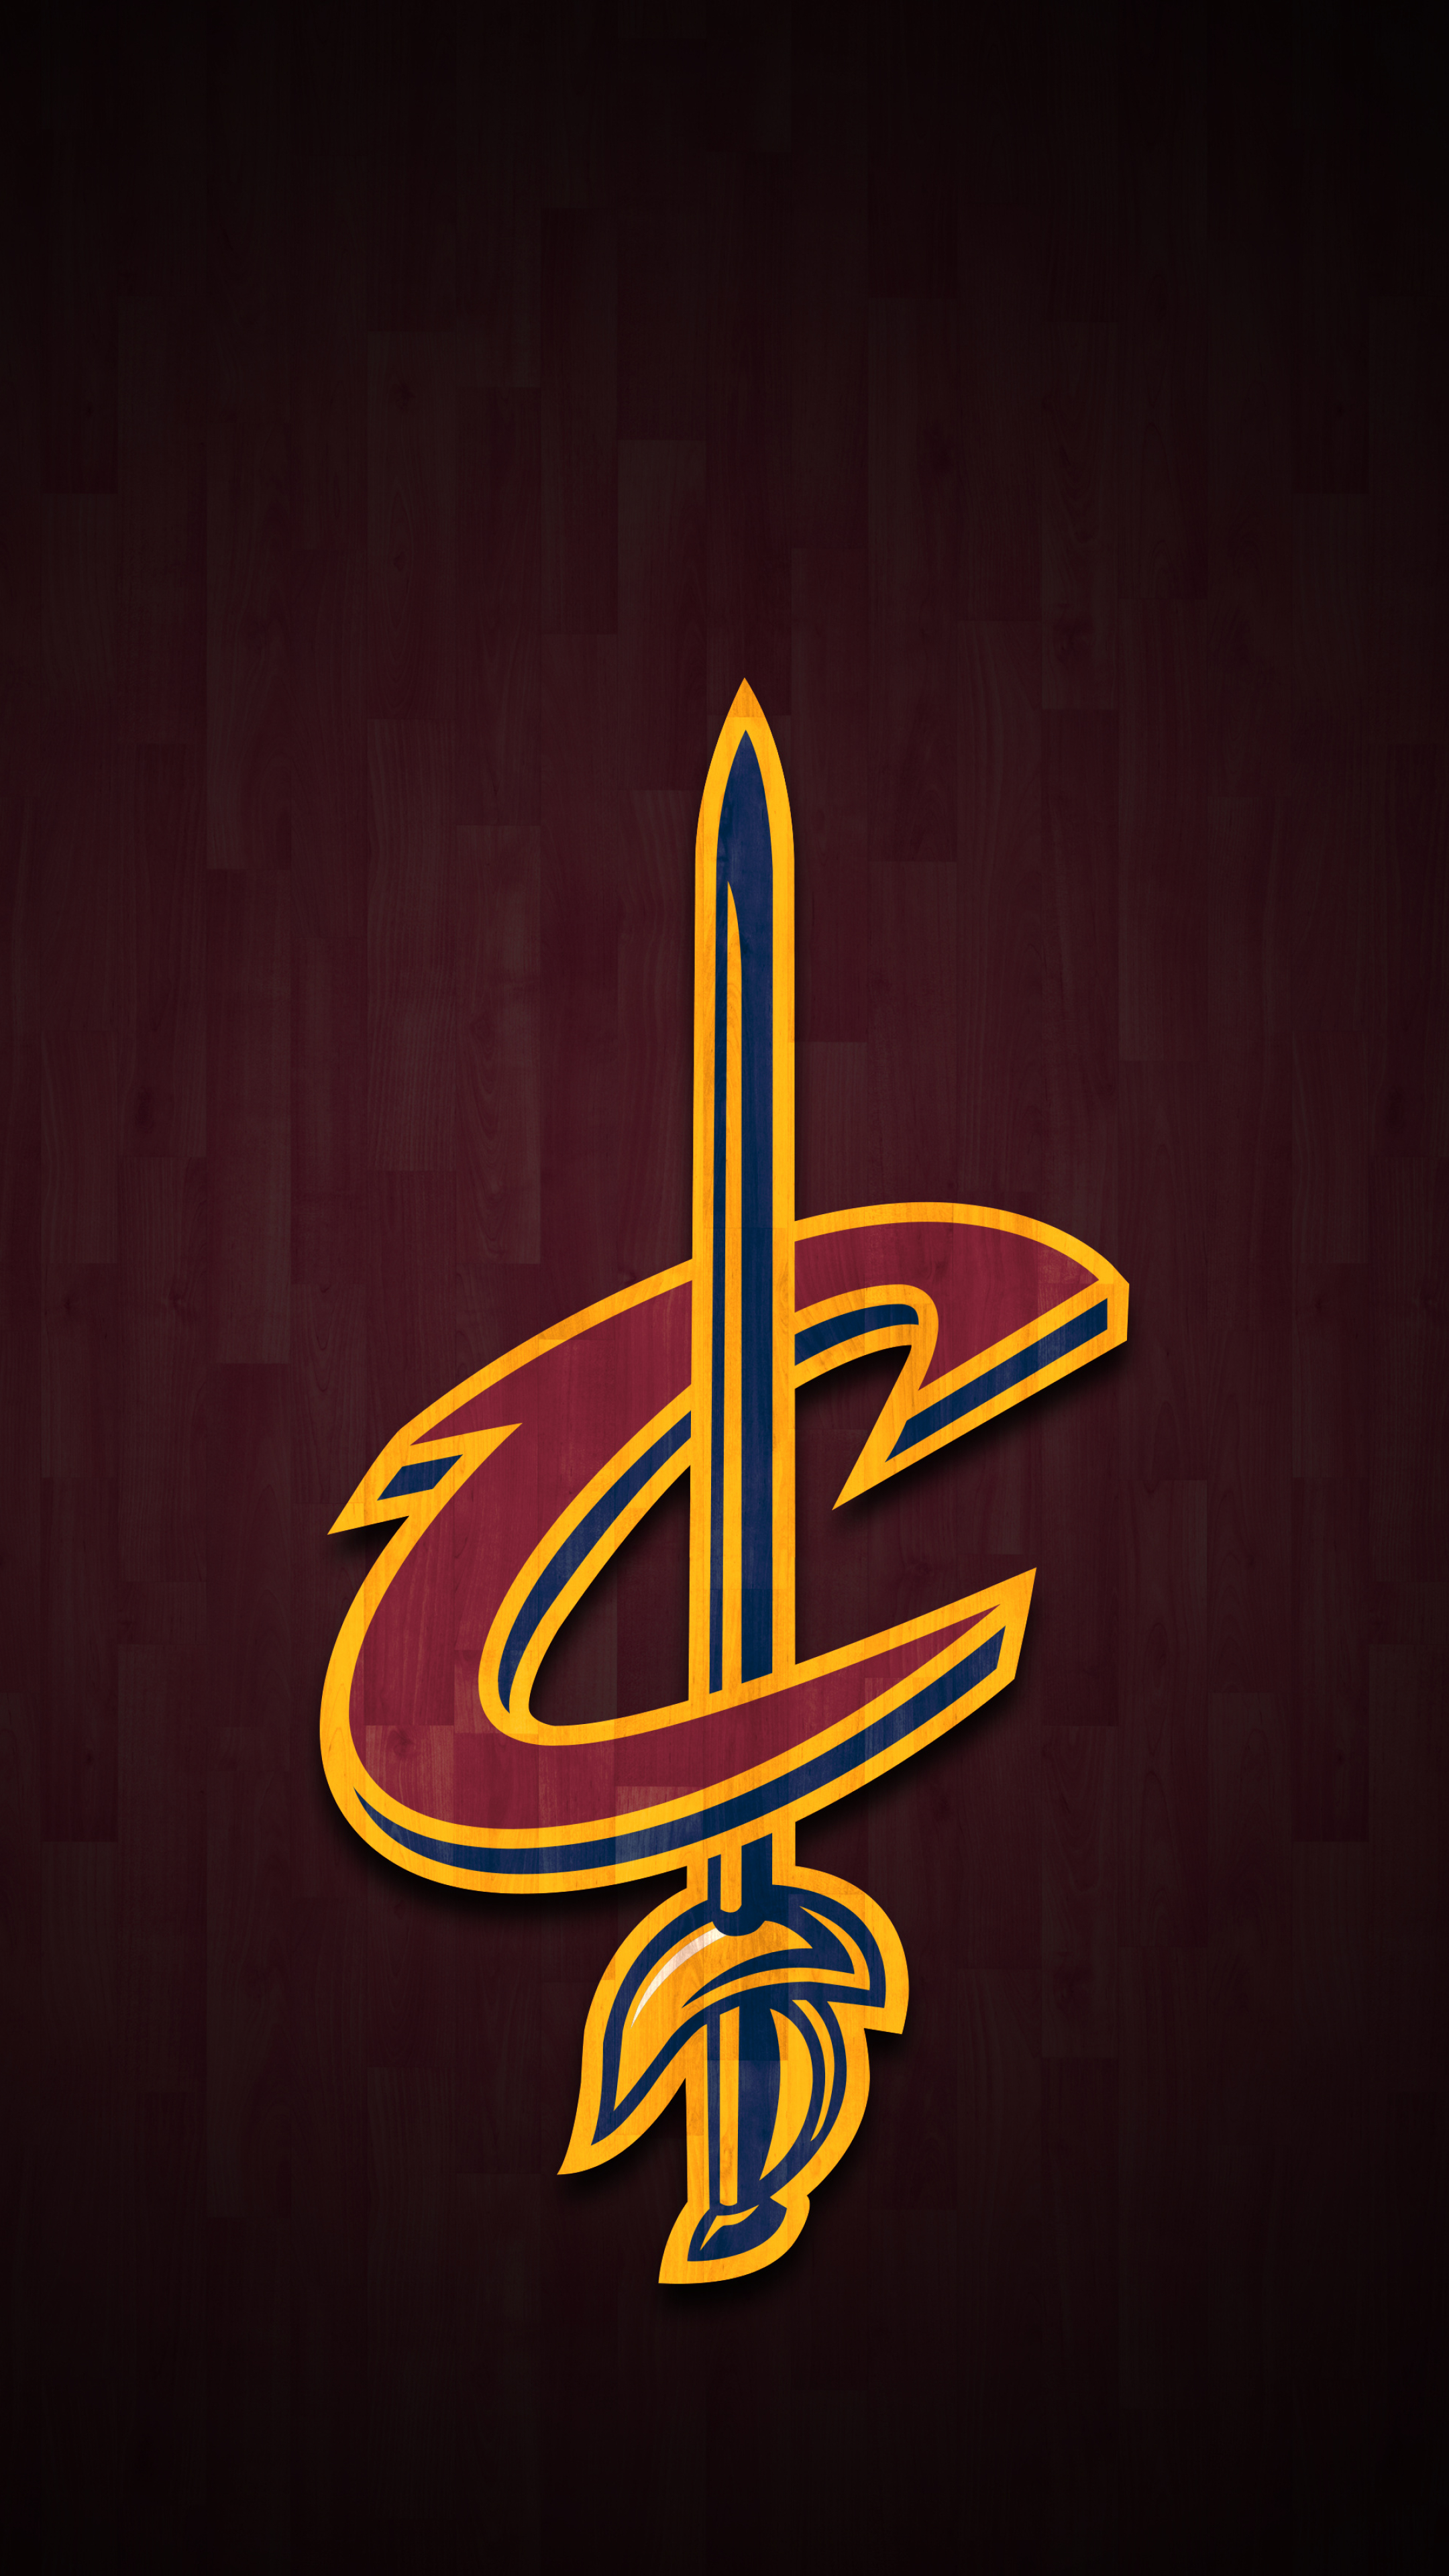 Cleveland Cavaliers: The team's home games were first held at Cleveland Arena. 2160x3840 4K Wallpaper.